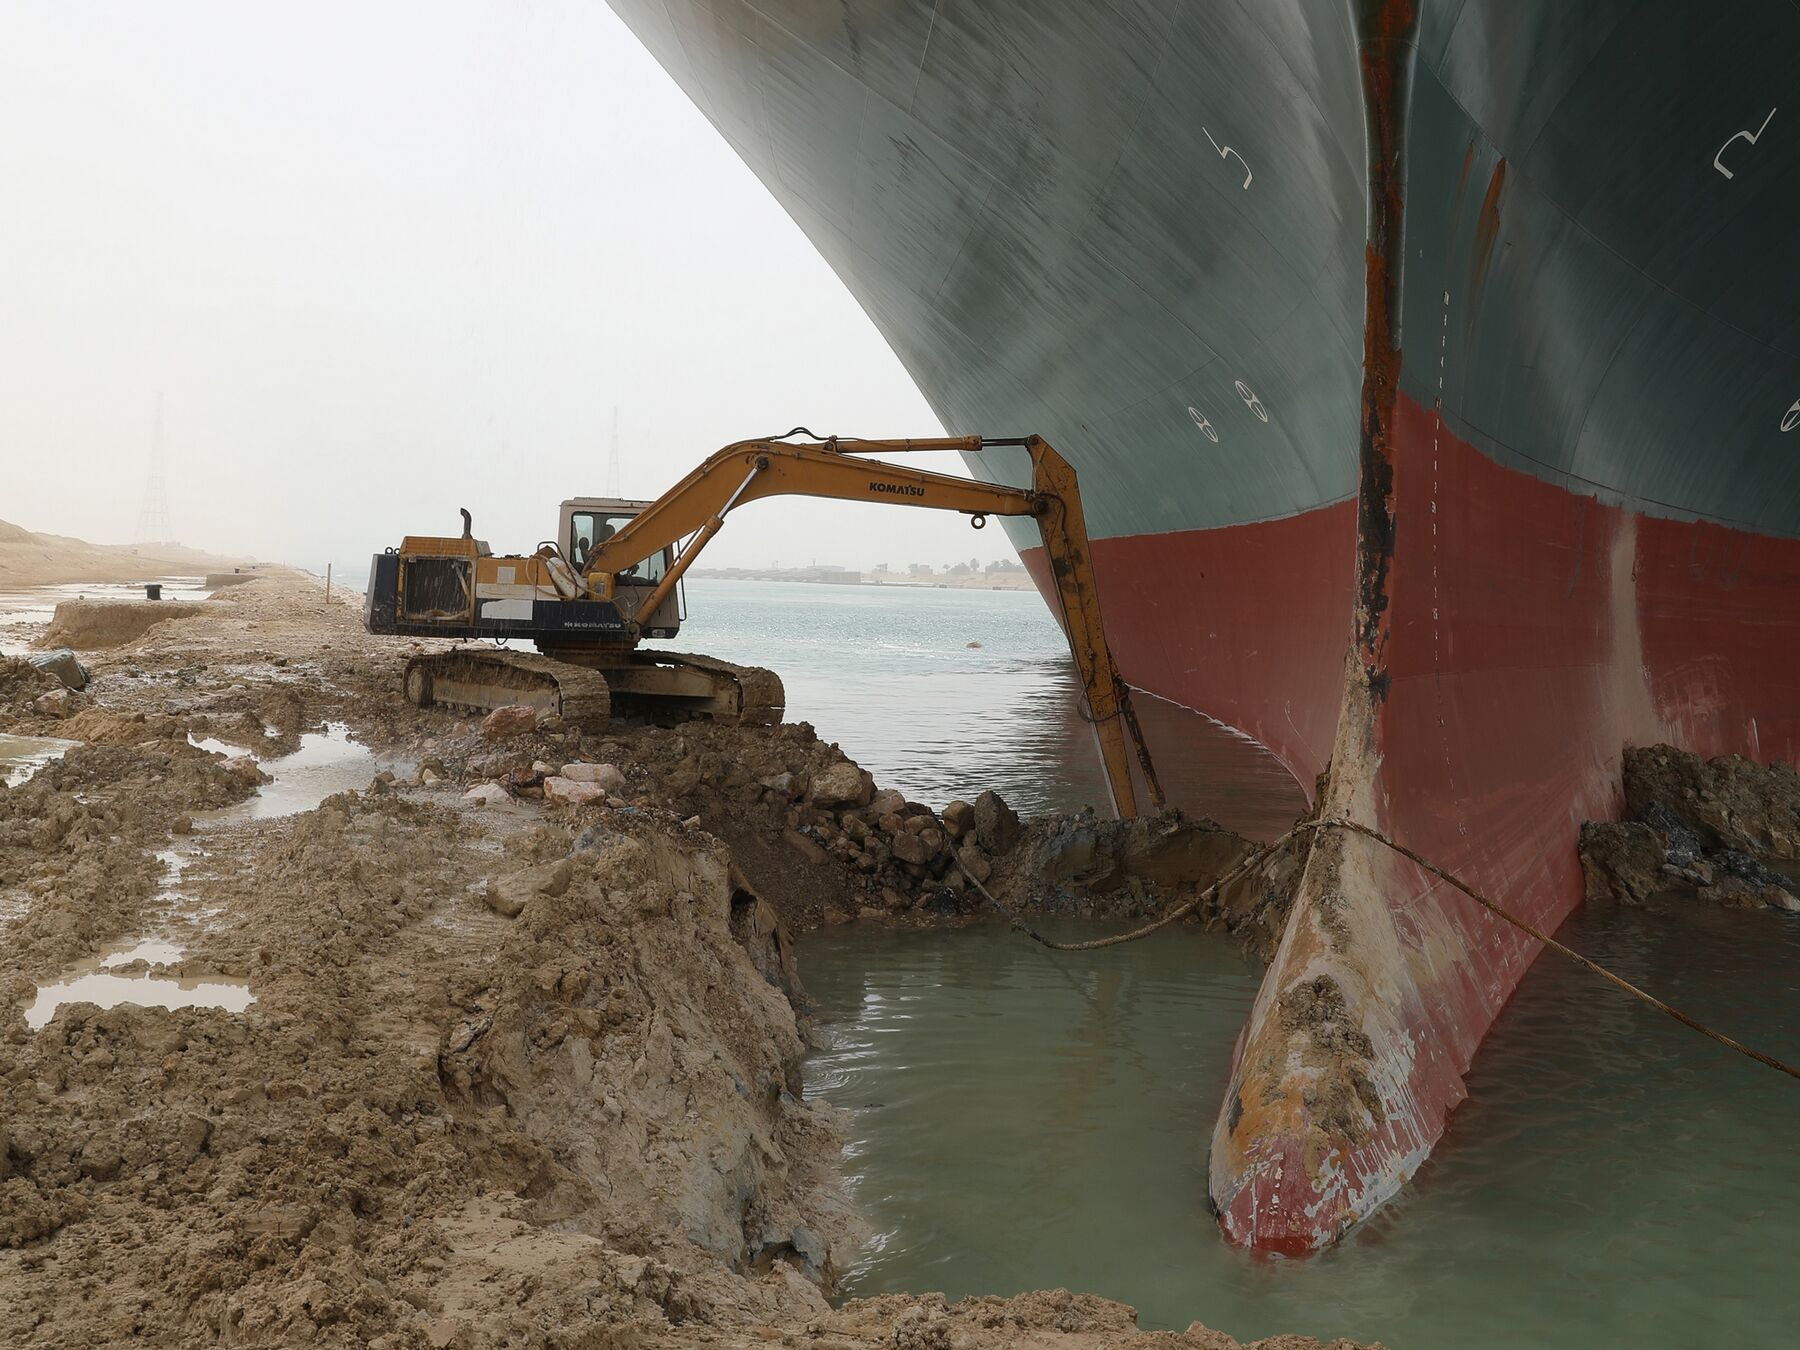 A digger clears the area around the bow of the stuck Ever Given container vessel in the Suez Canal on March 25.